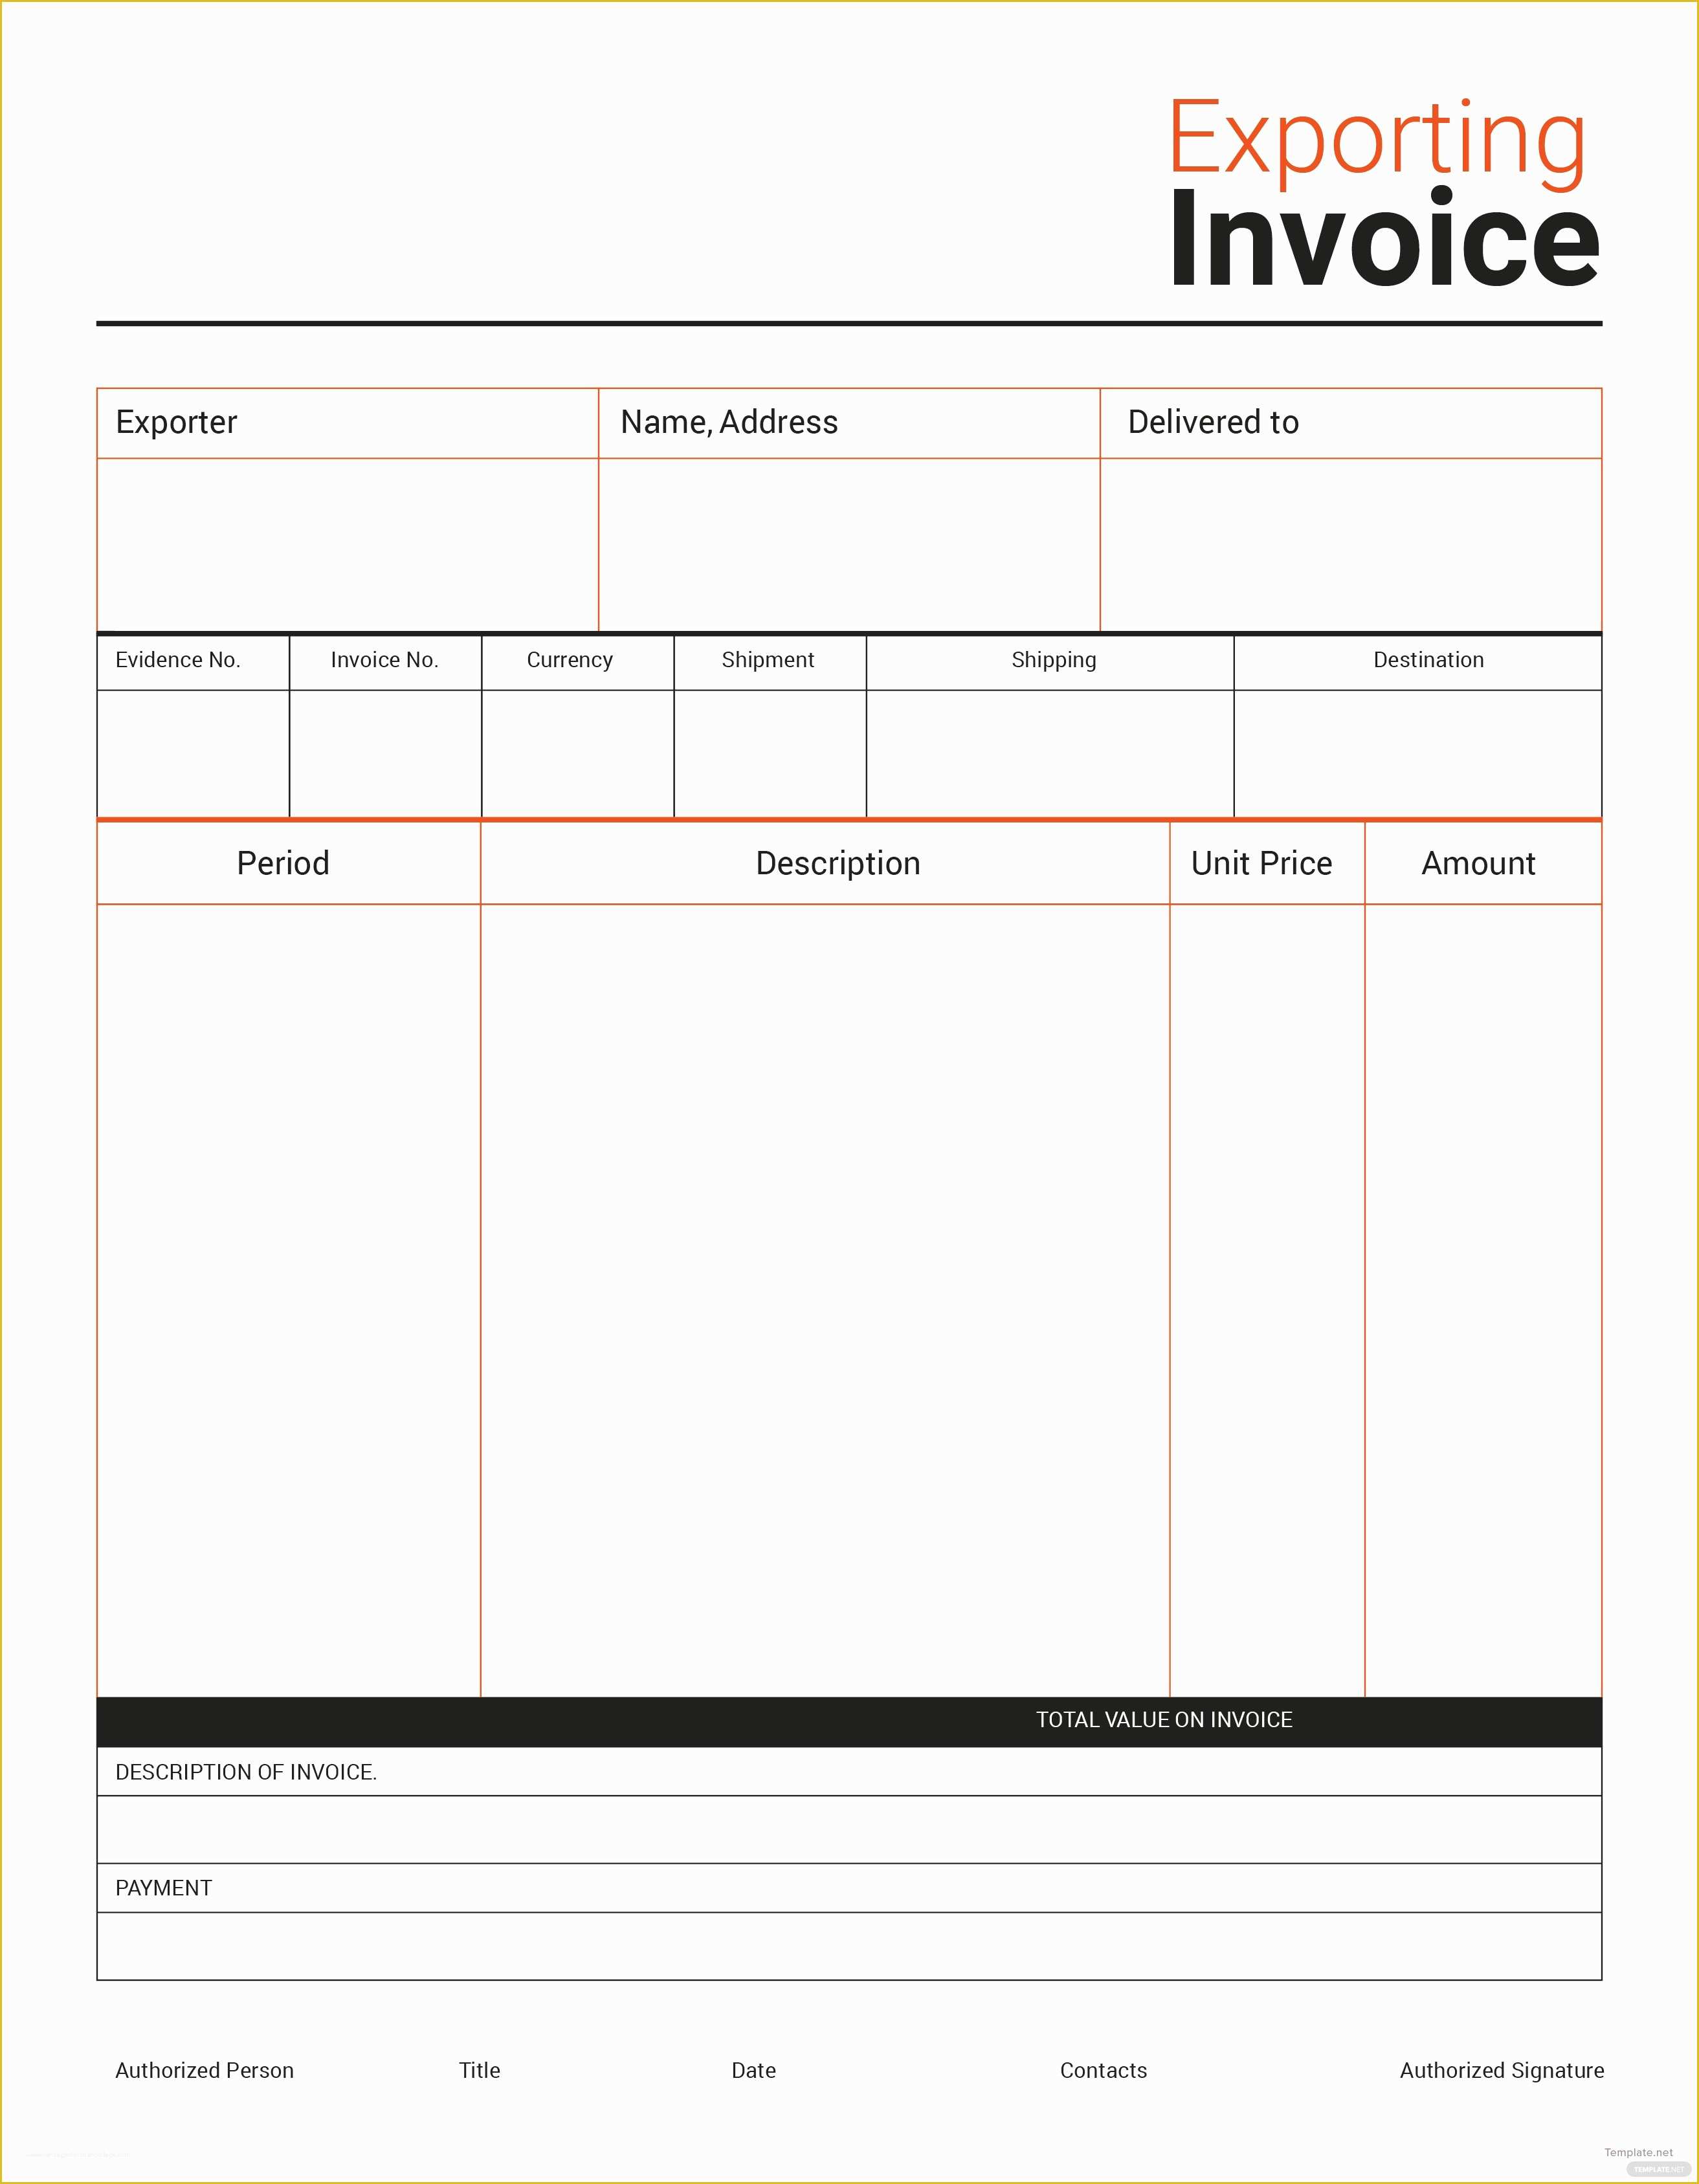 Free Adobe Pdf Templates Of Free Mercial Export Invoice Template In Adobe Shop